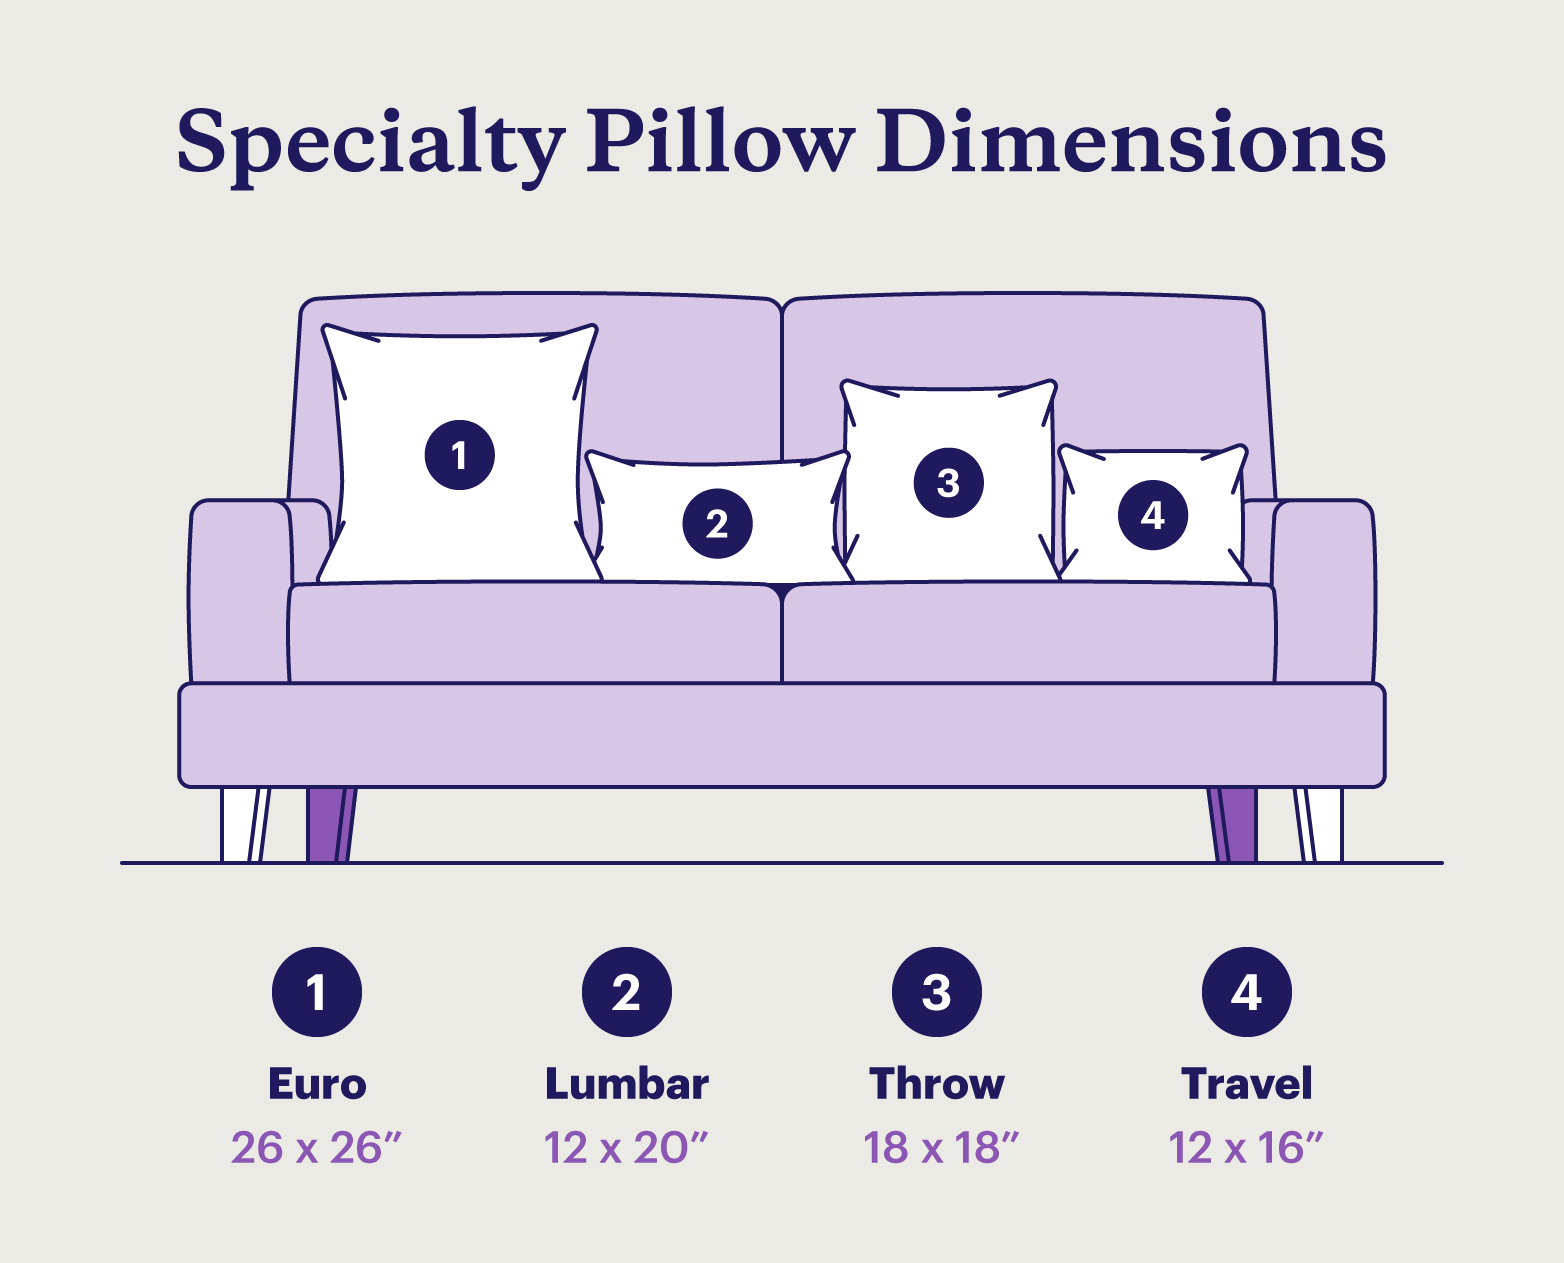 Illustration of four specialty pillows on a purple couch with their dimensions